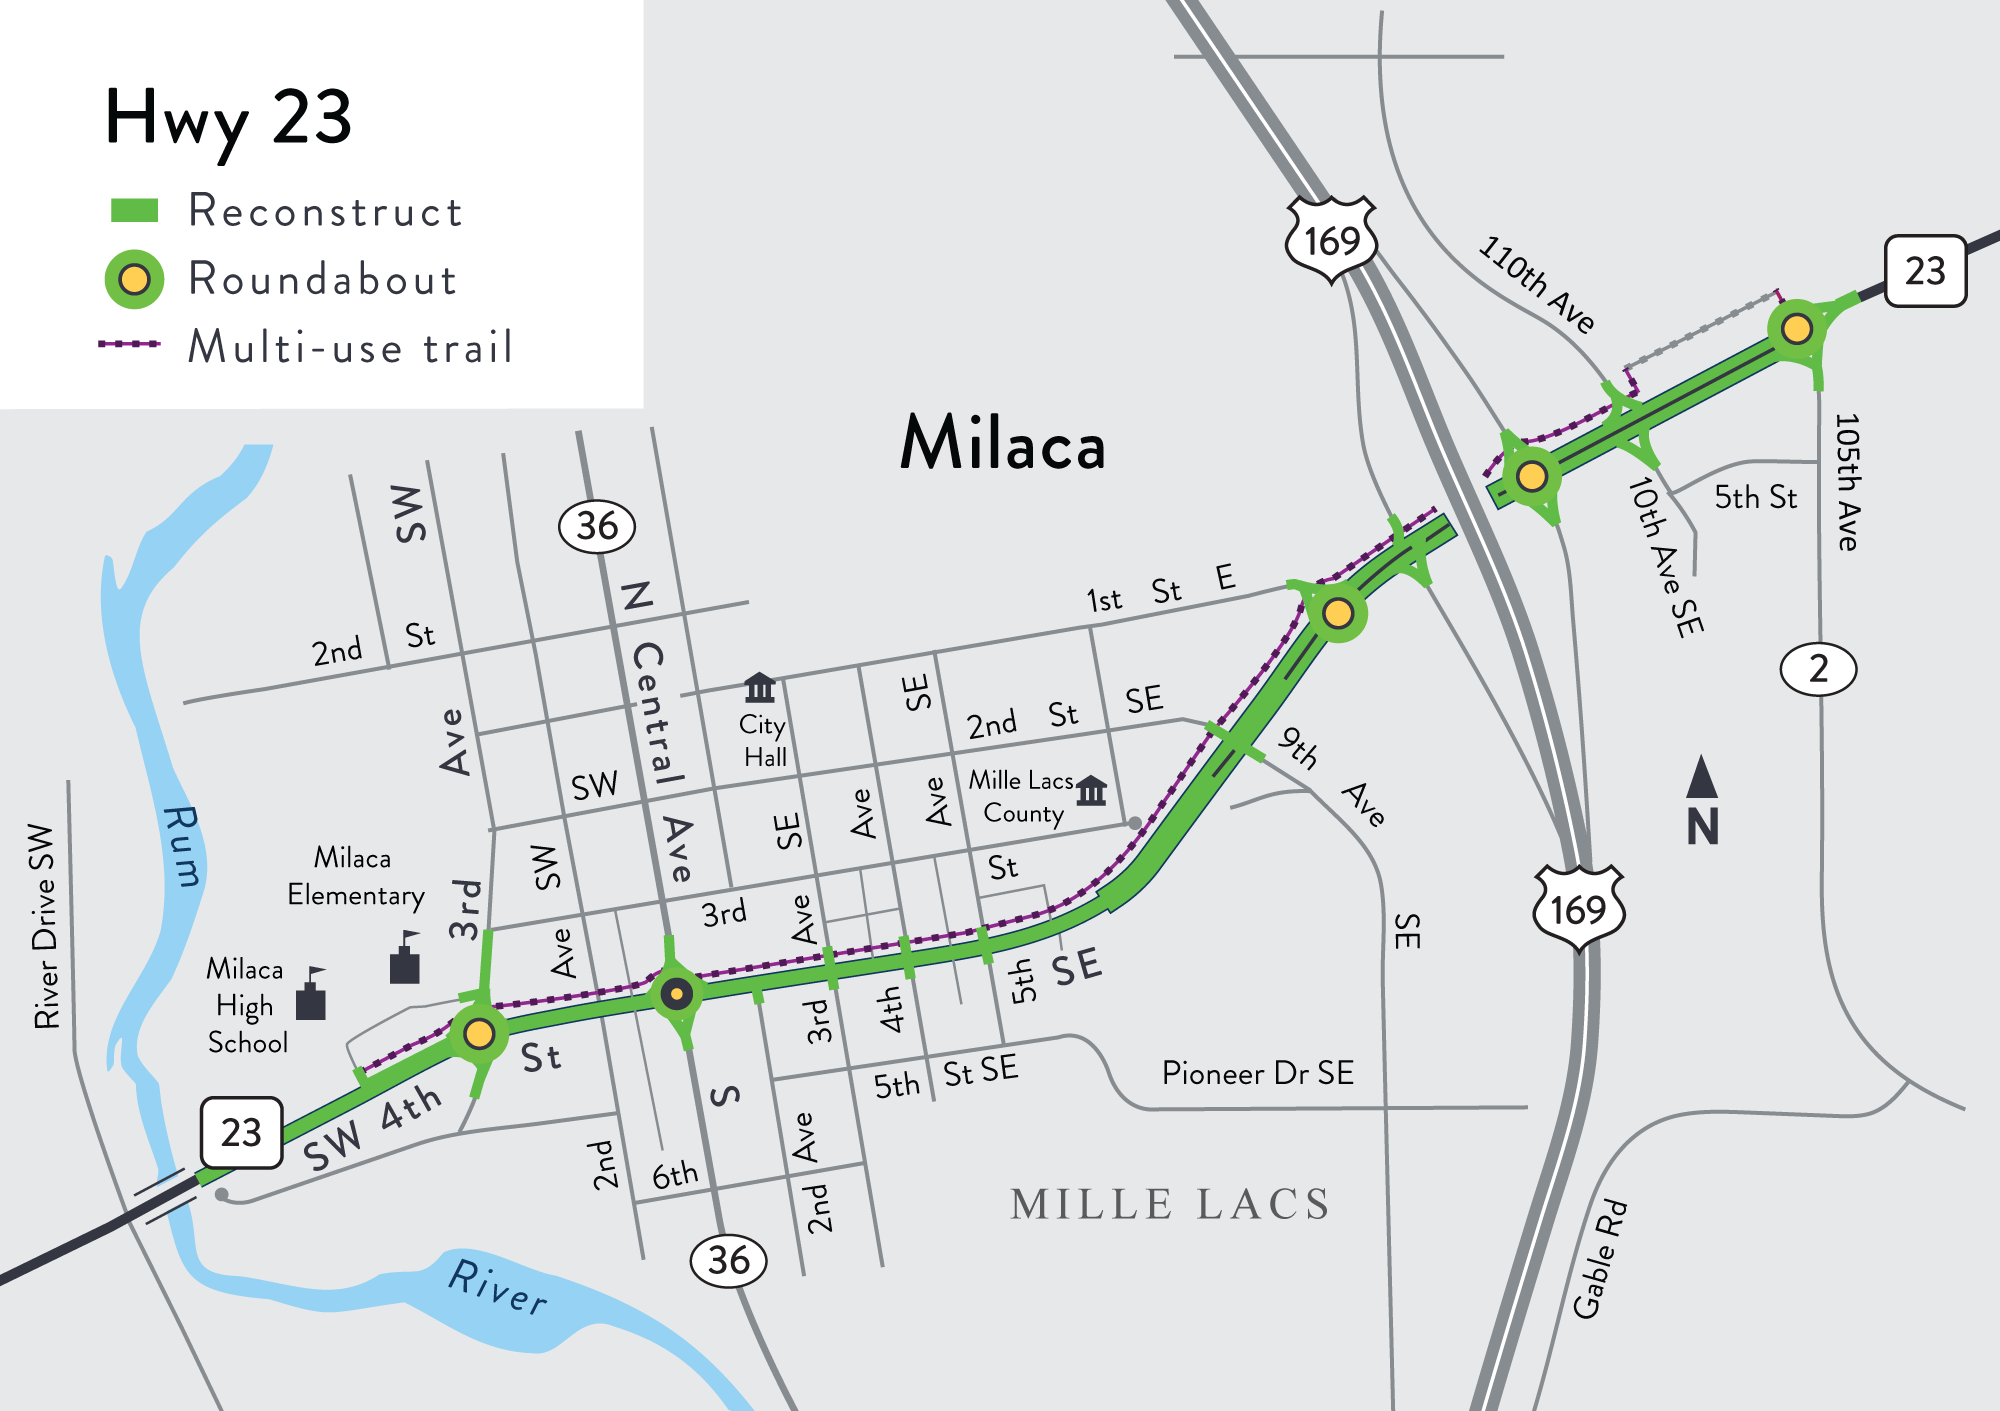 Hwy 23 Milaca project map